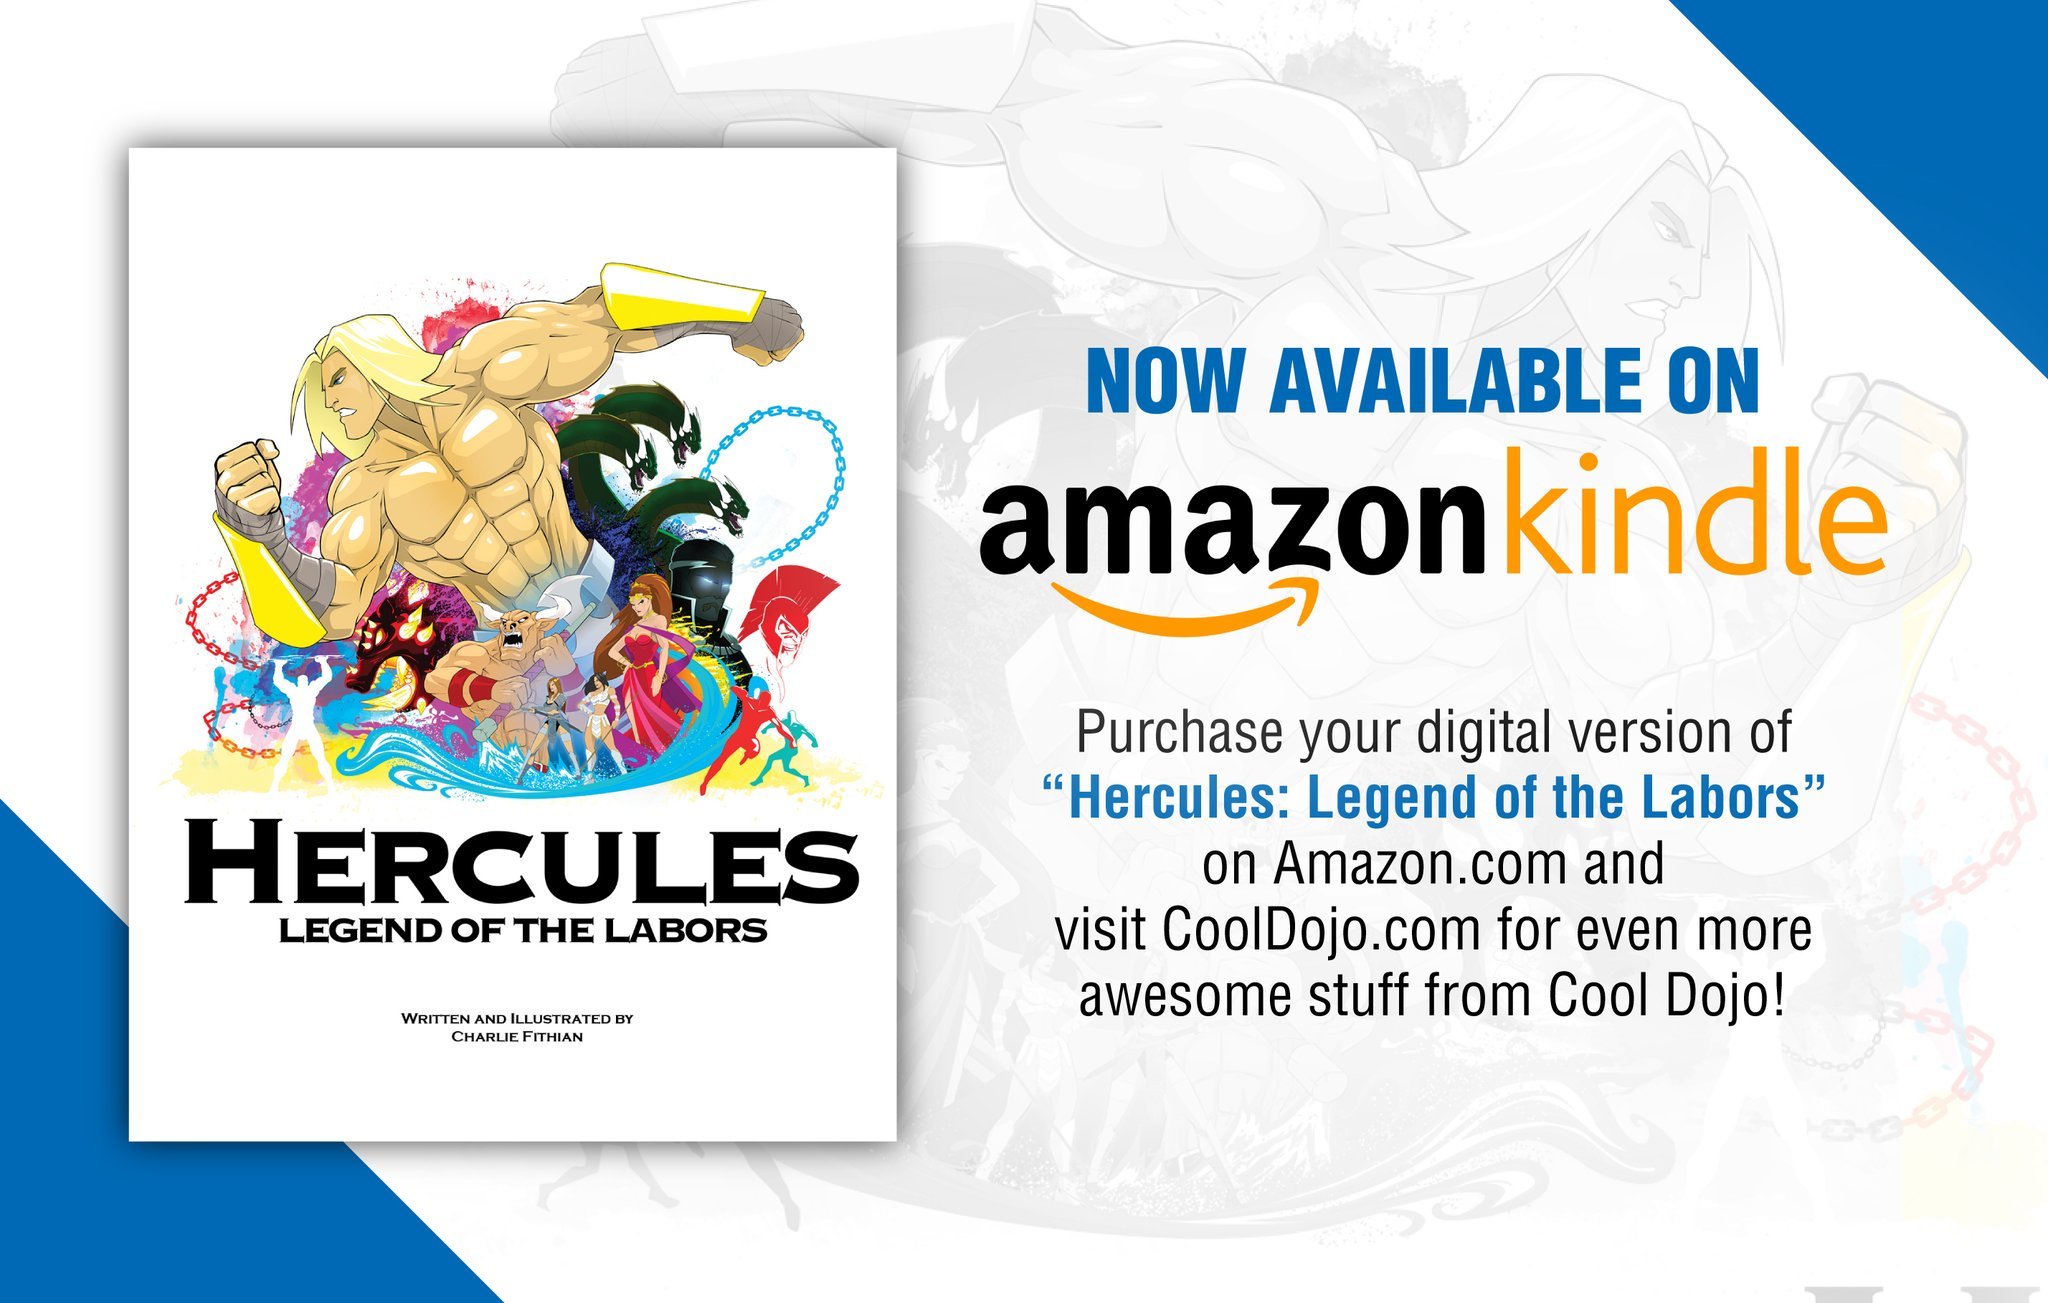 Purchase a paper back and digital version of &ldquo;Hercules: Legend of the Labors&rdquo; here: https://a.co/d/0sEcoCk

&quot;HERCULES: LEGEND OF THE LABORS&quot;
The twelve labors of Hercules have been told for thousands of years by many authors. Fo